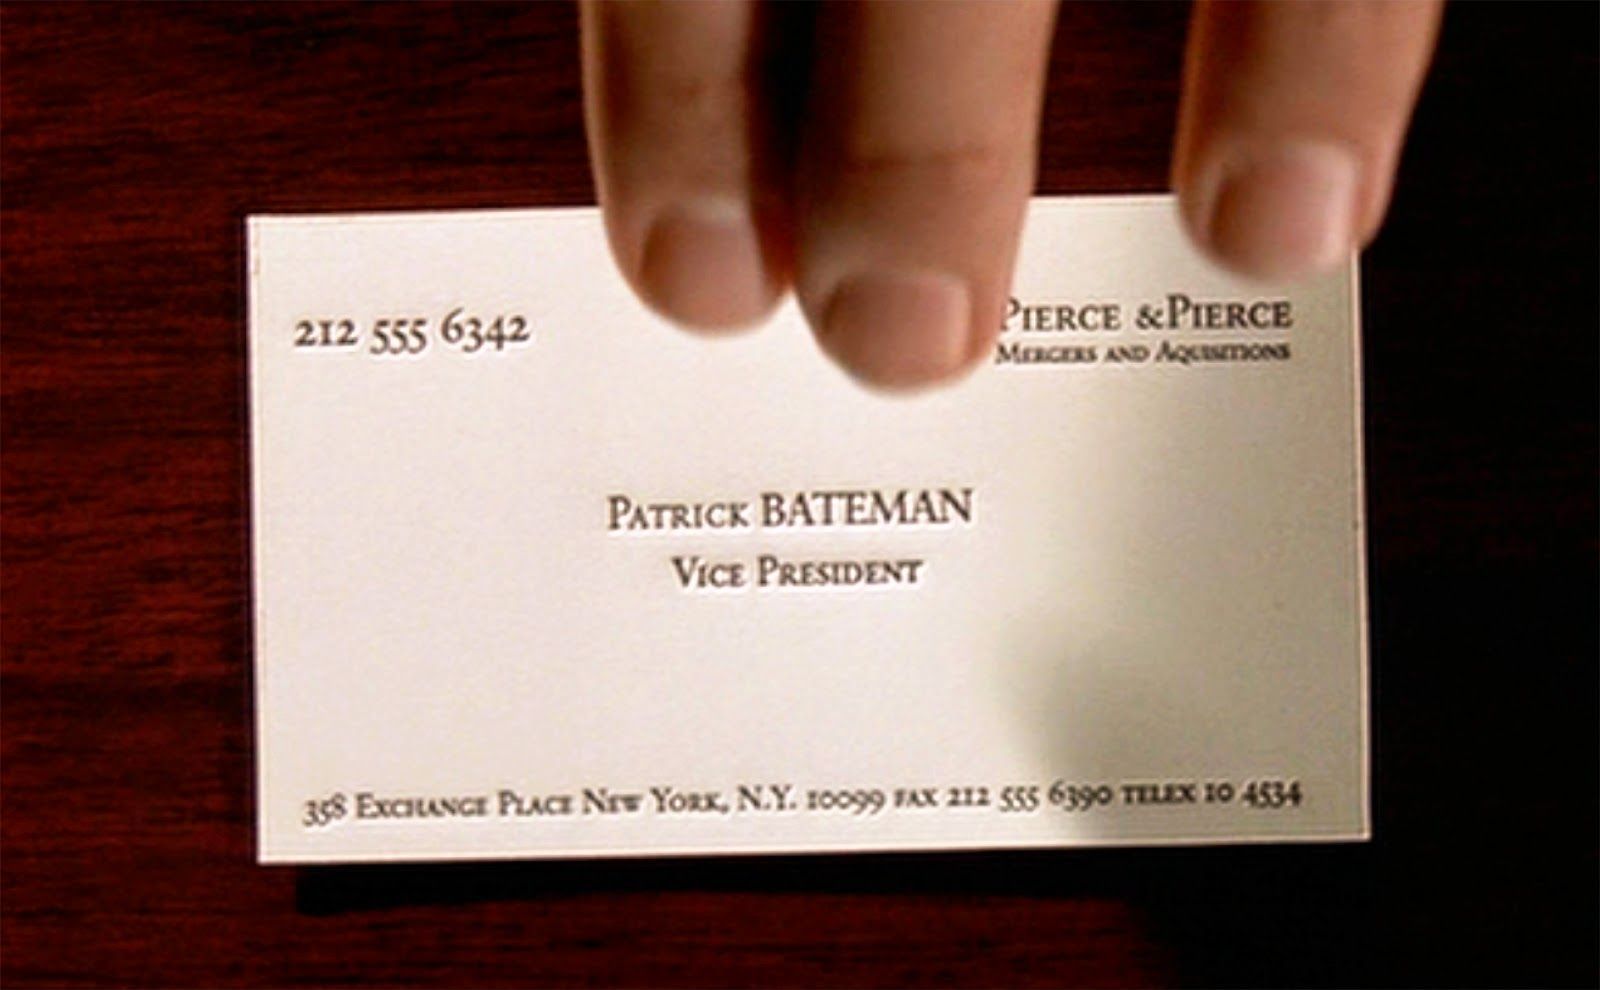 The logo-free and very plain business card of Patrick Pateman in the movie American Psycho